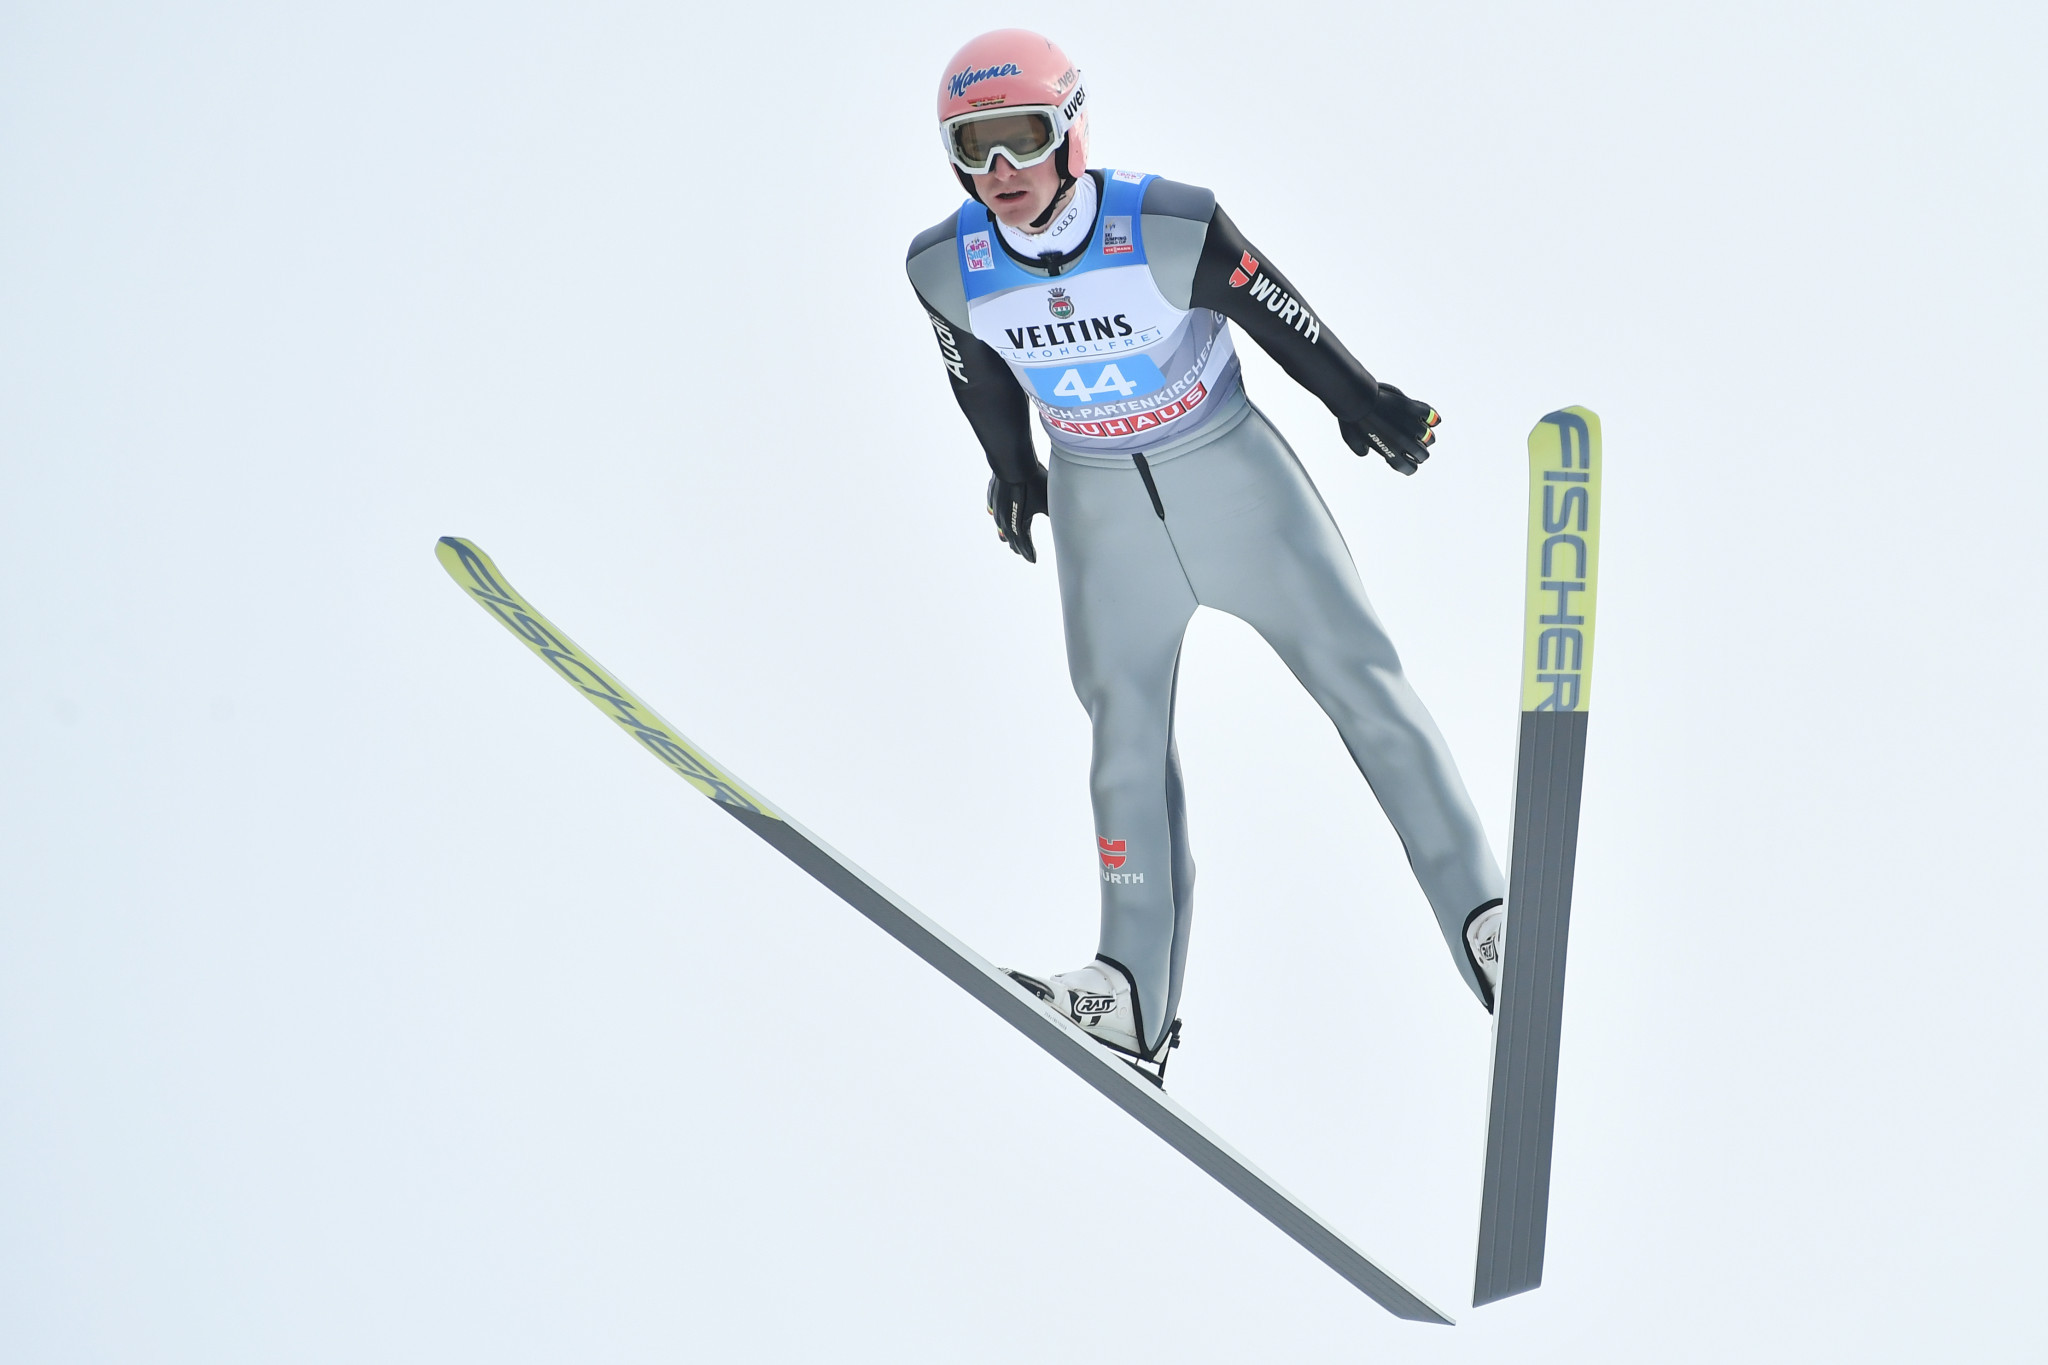 Severin Freund has won an Olympic gold medal in ski jumping ©Getty Images